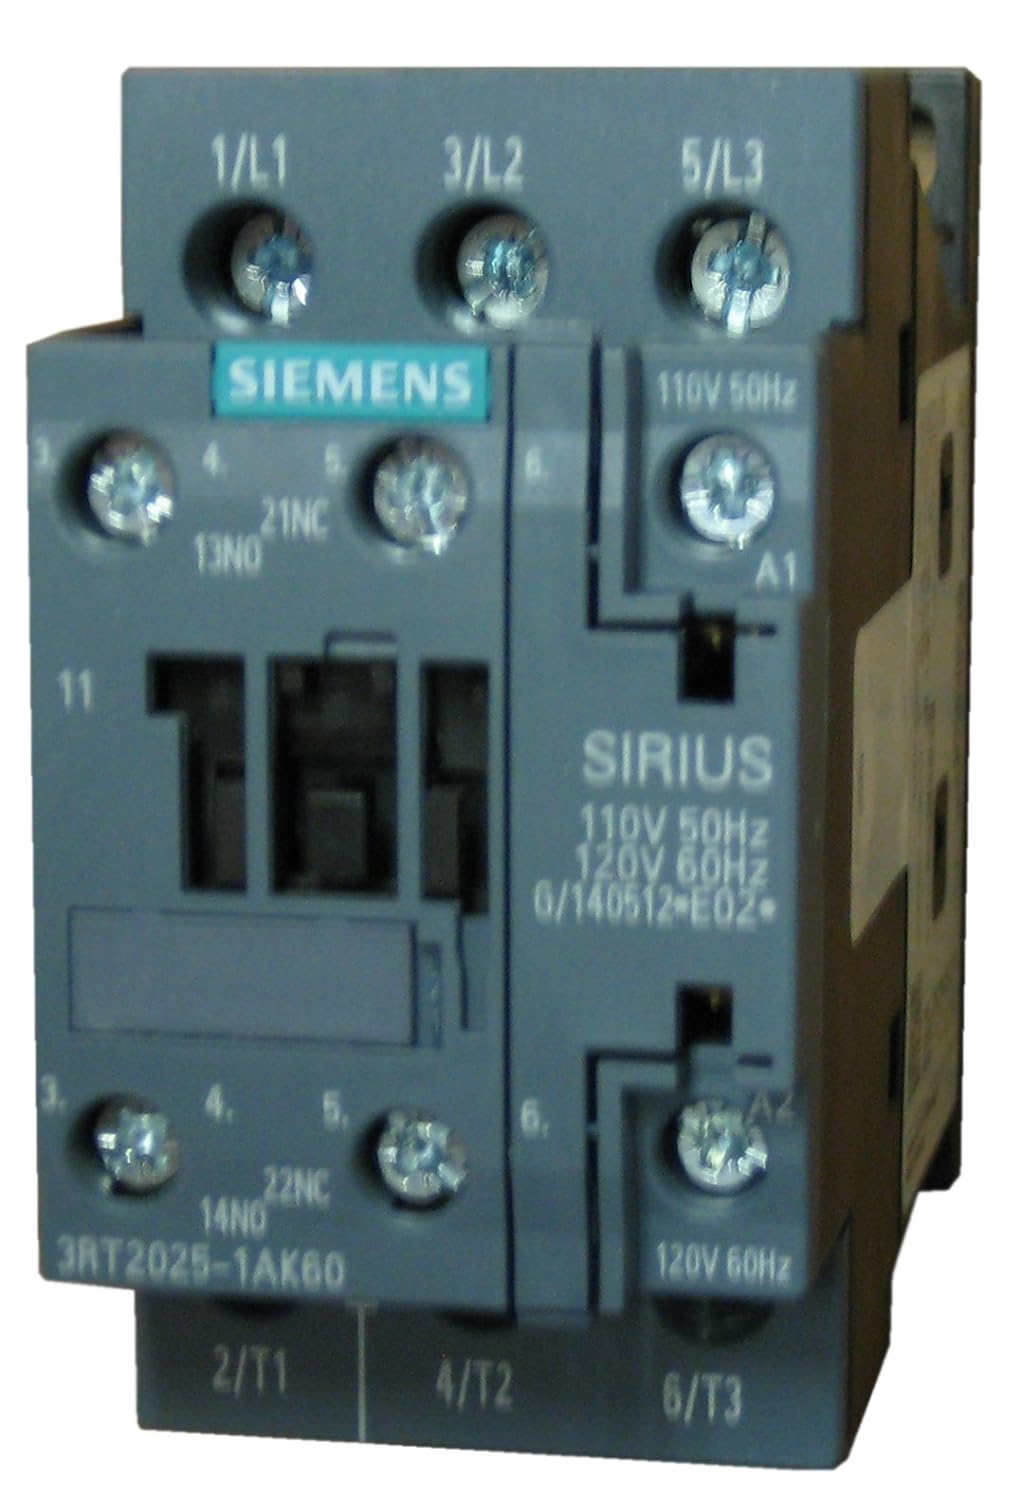 Siemens 3RT2025-1AK60 3 Pole, 16 AMP contactor Rated 5 H.P @ 230v / 10 H.P. @ 460 Volt 3 Phase - 110/120vAC Coil and 1 N.O./1 N.C. Base Mounted Auxiliary Contacts